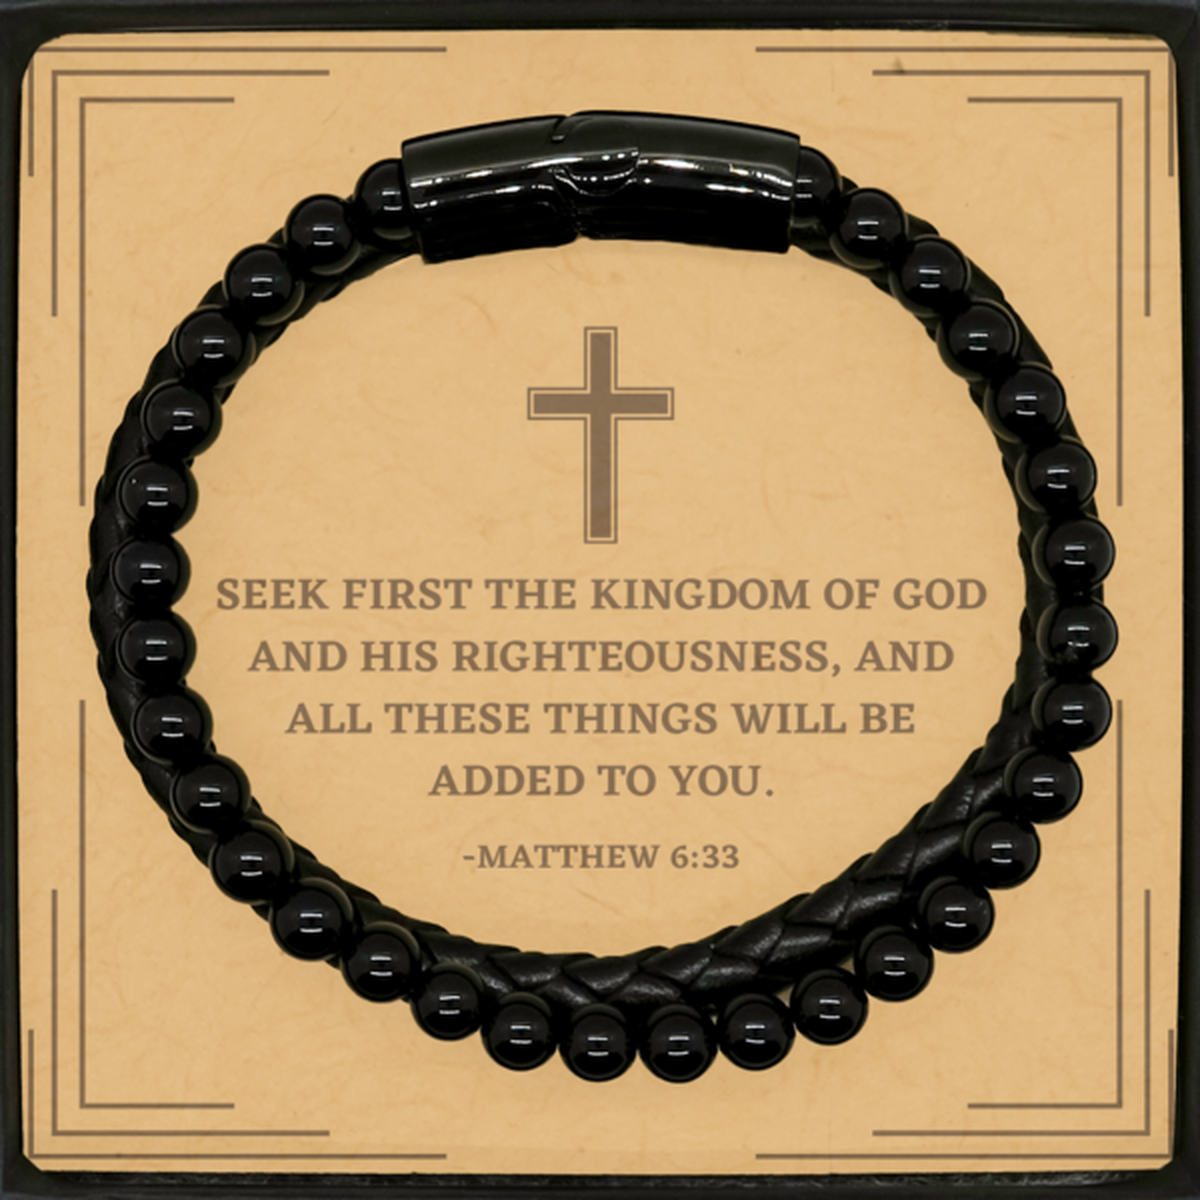 Baptism Gifts For Teenage Boys Girls, Christian Bible Verse Stone Leather Bracelet, Seek first the kingdom of God, Confirmation Gifts, Bible Verse Card for Son, Godson, Grandson